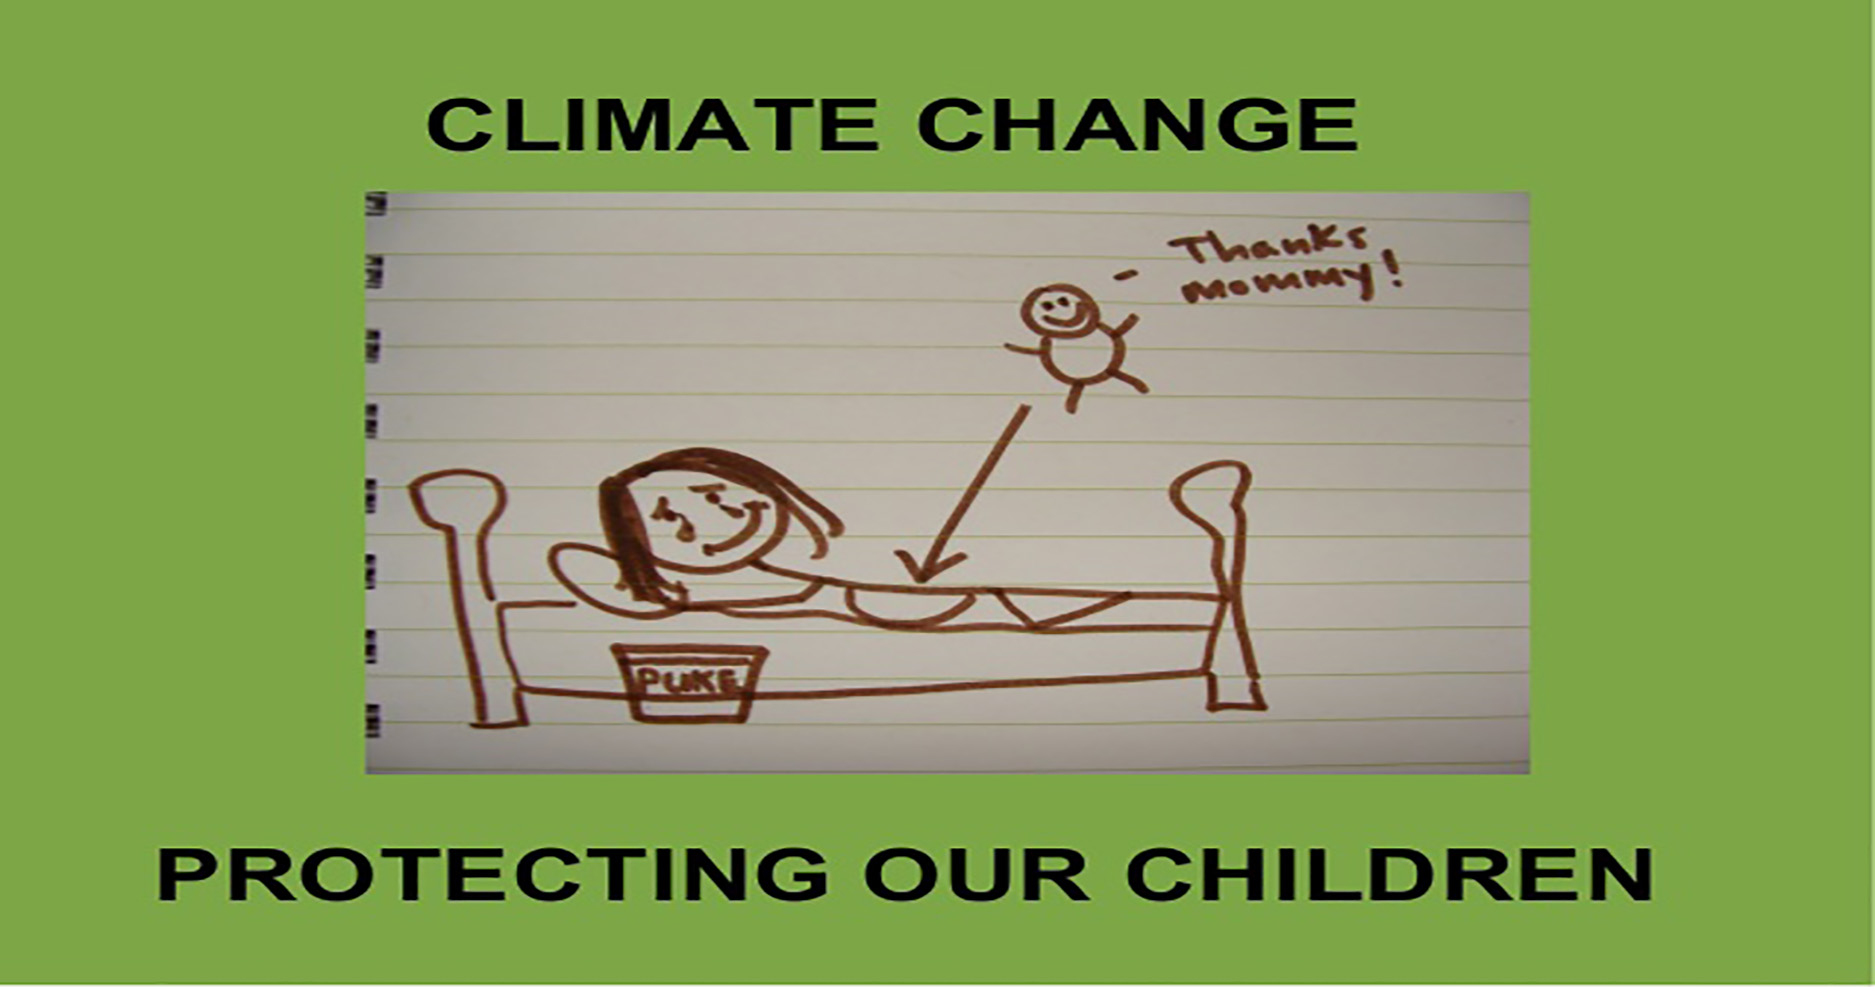 Protecting children from climate change